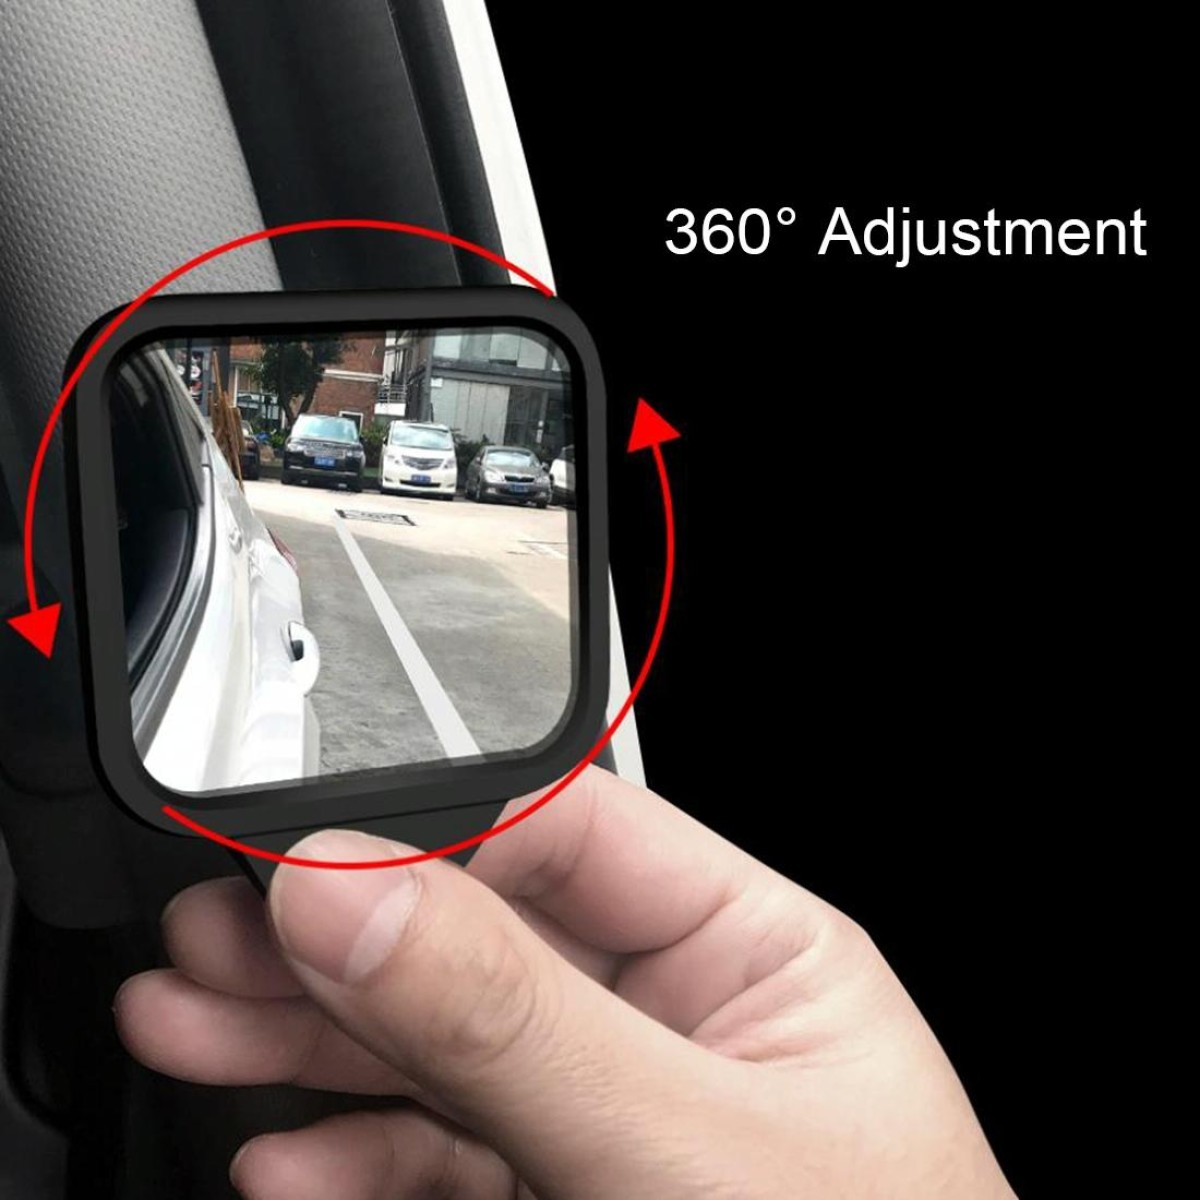 3R-2130 Car Truck Interior Adjustable Wide Angle Rear View Blind Spot Mirror, Size: 7*6.5*1cm